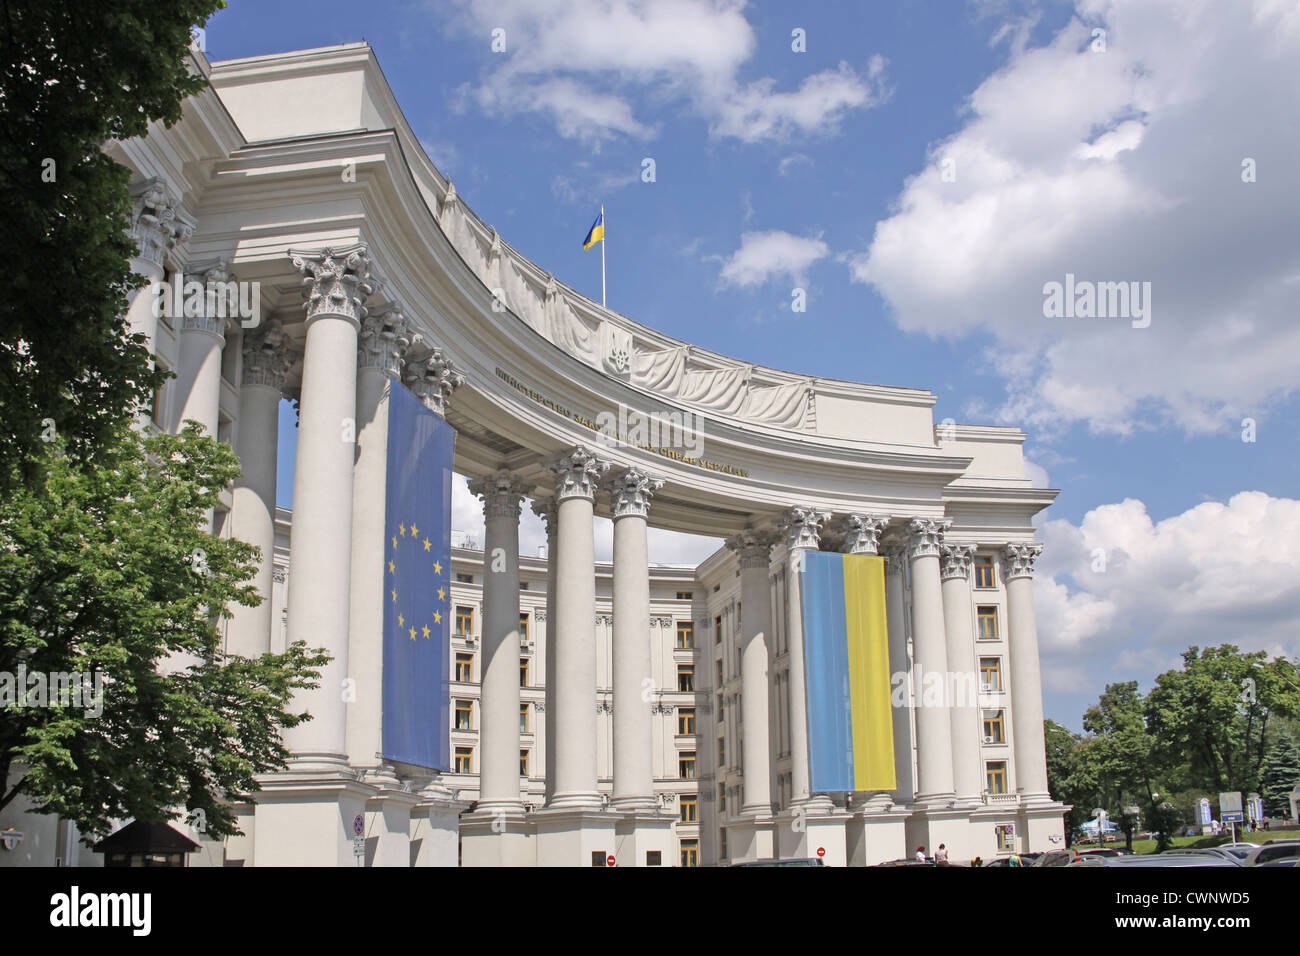 The main building of the Ukrainian Ministry of Foreign Affairs in historic central Kiev Stock Photo